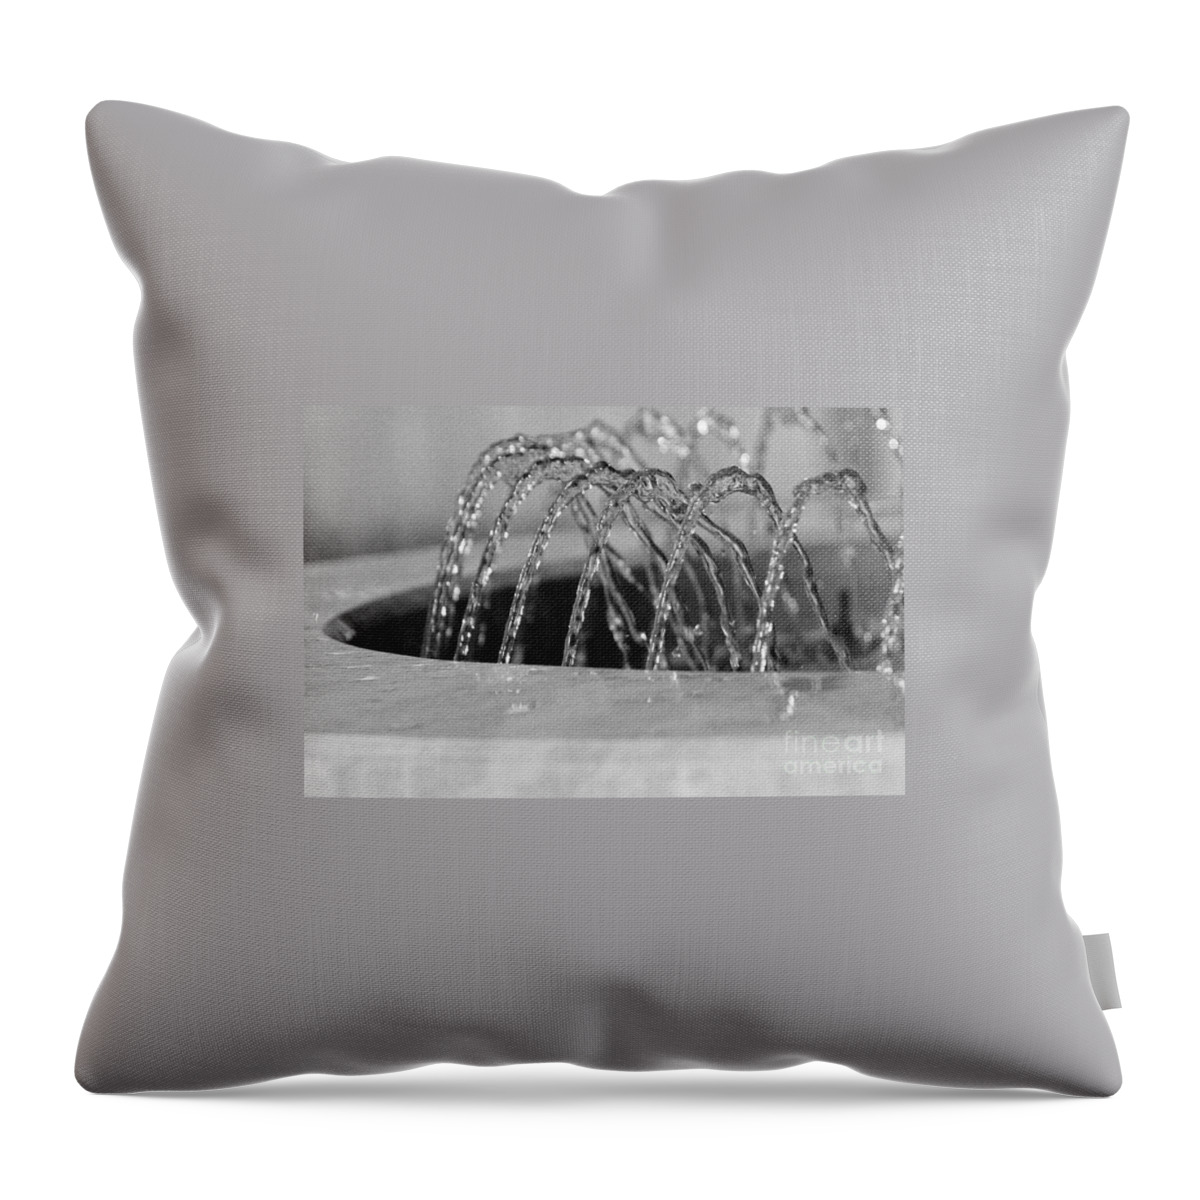 Water Throw Pillow featuring the photograph Centipede by Eileen Gayle